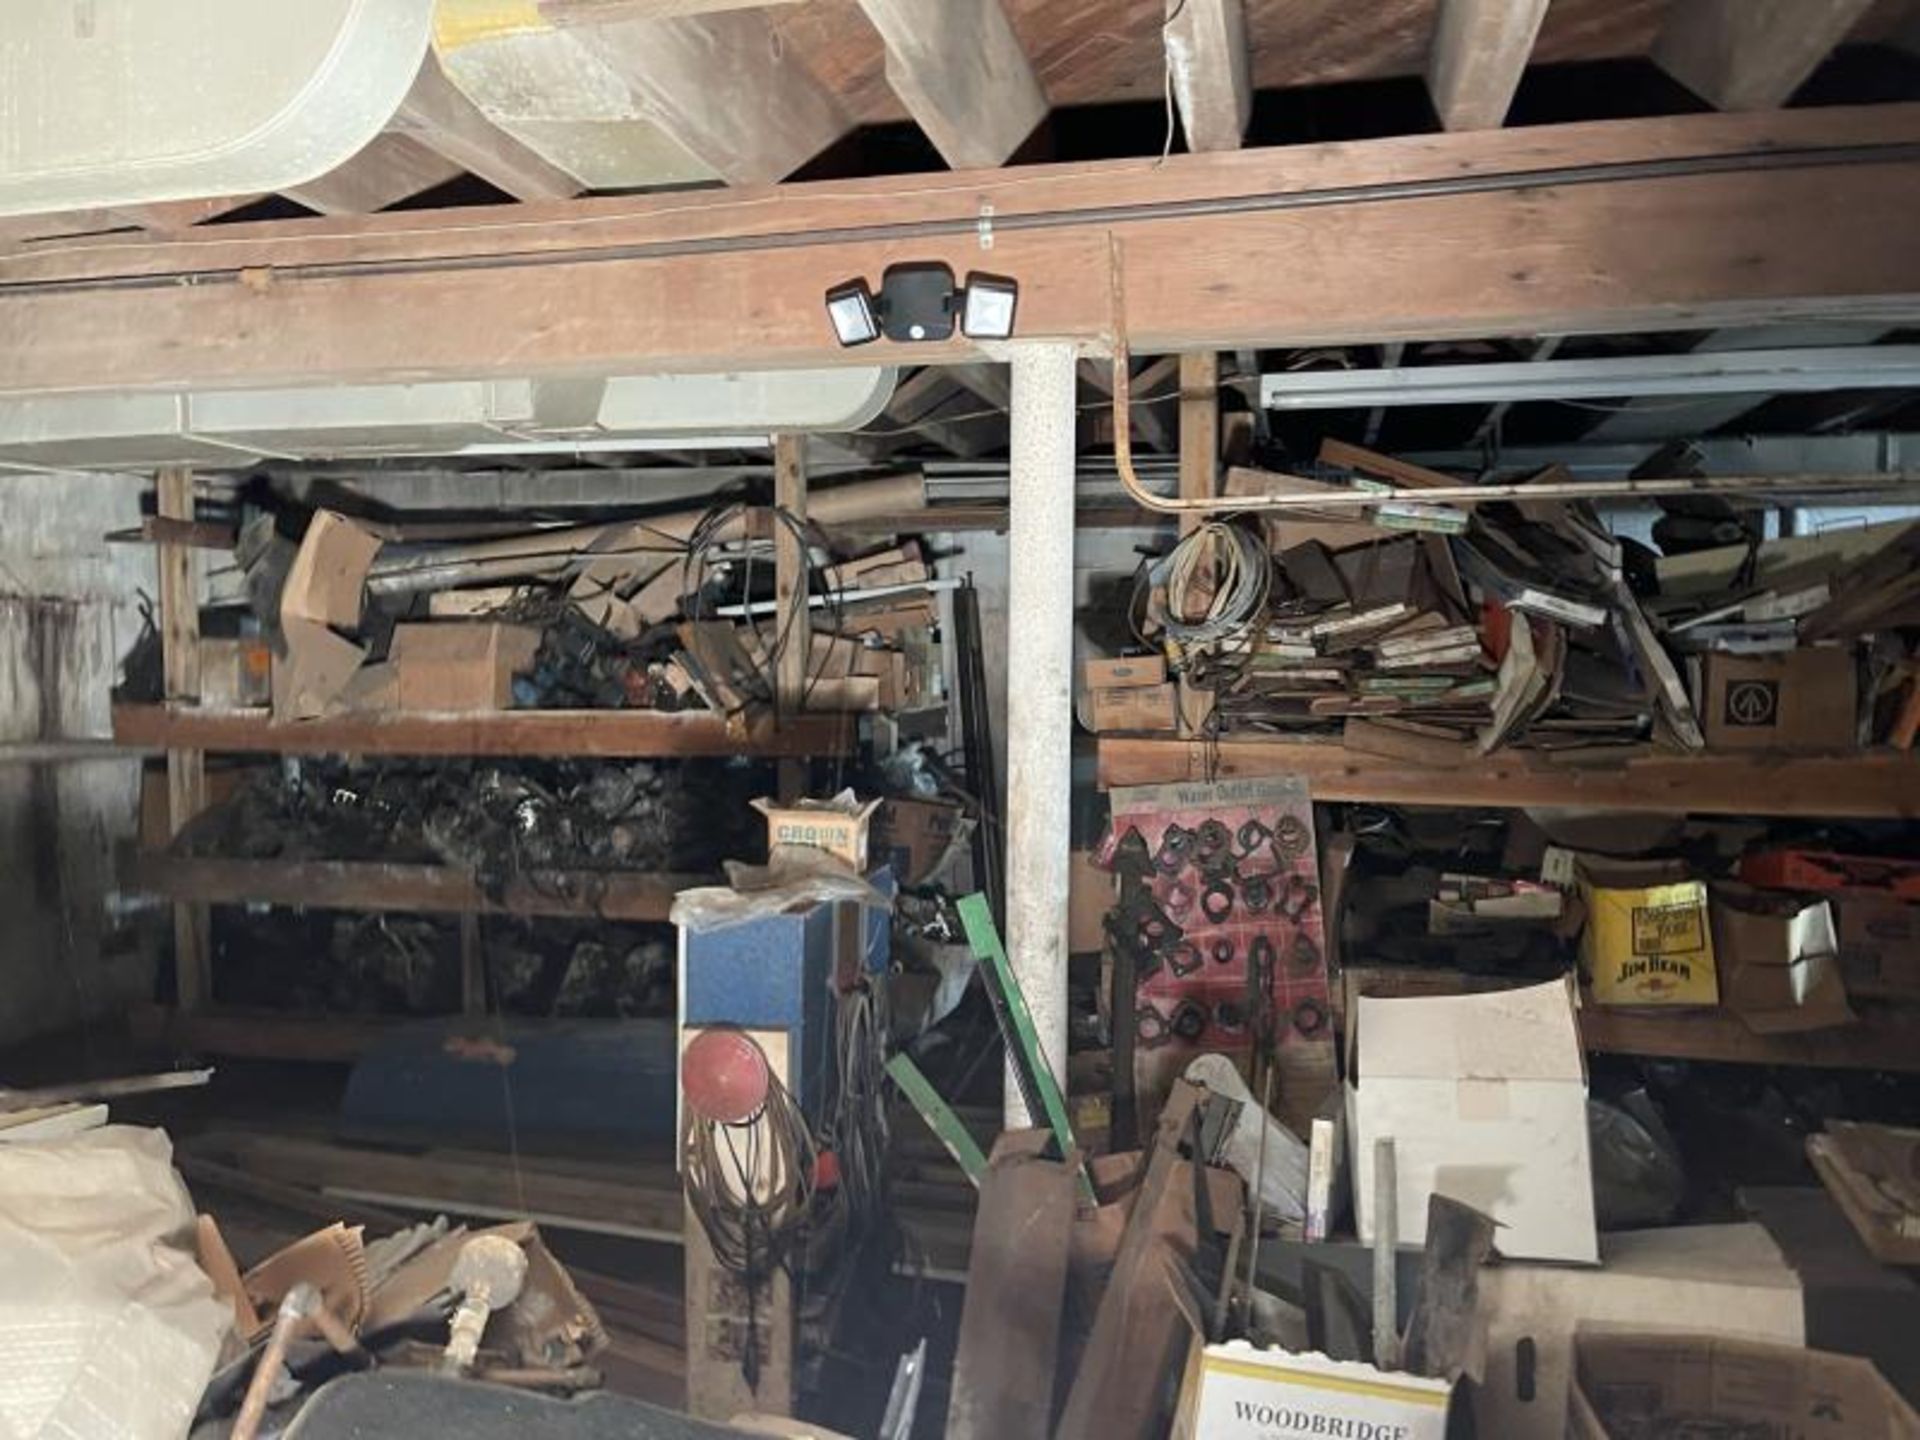 Contents Of Basement: Old Car Parts, Engine Parts, Body Parts, Starters, Alternators, All Must Be - Image 20 of 37